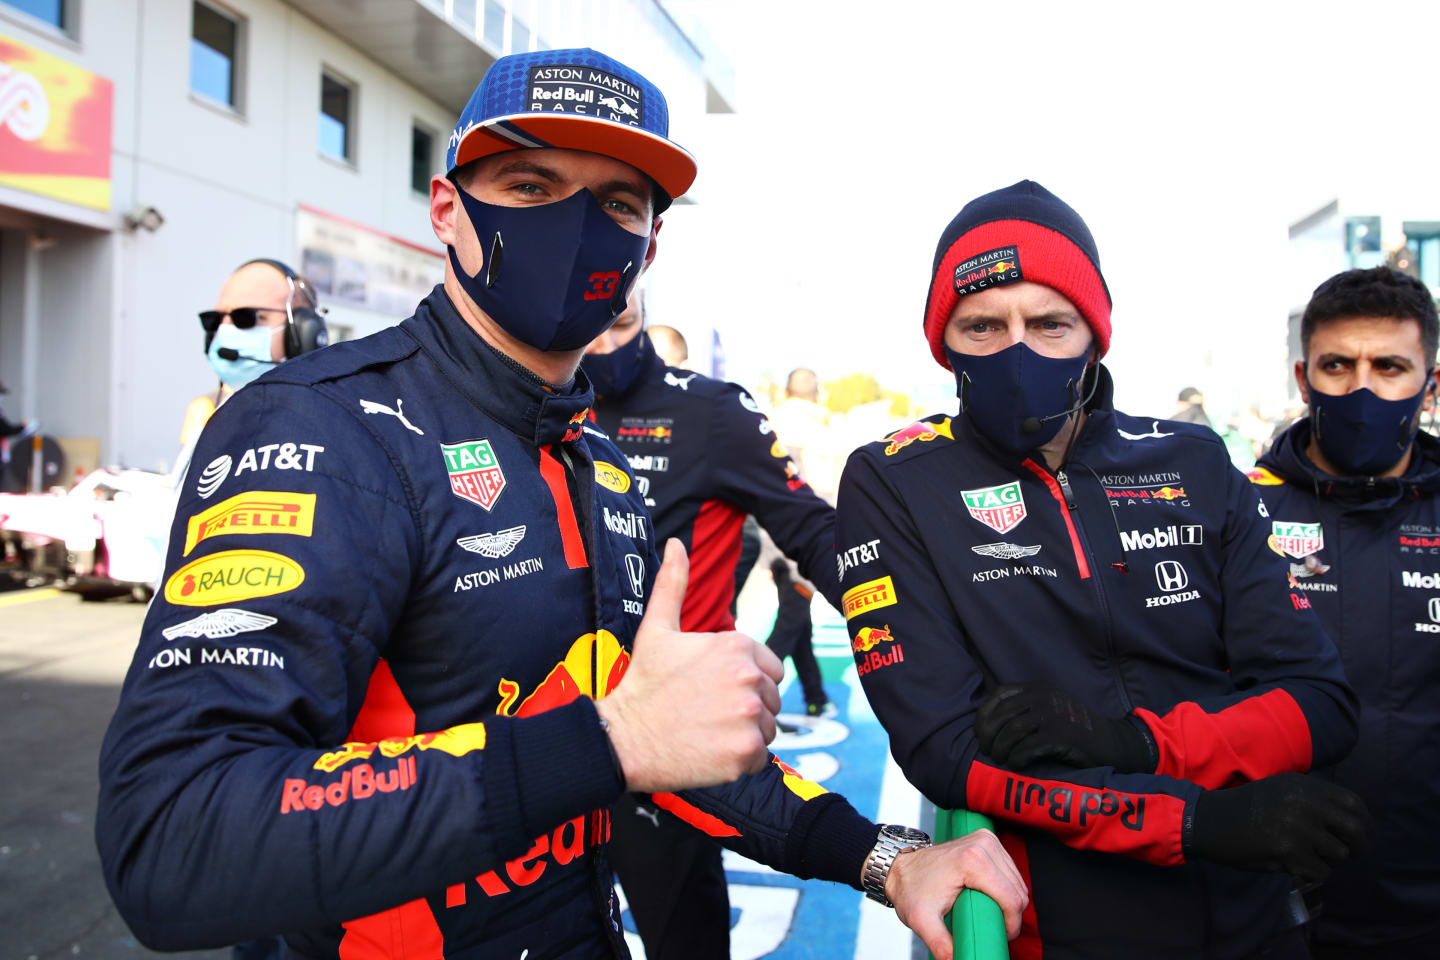 NUERBURG, GERMANY - OCTOBER 10: Third placed qualifier Max Verstappen of Netherlands and Red Bull